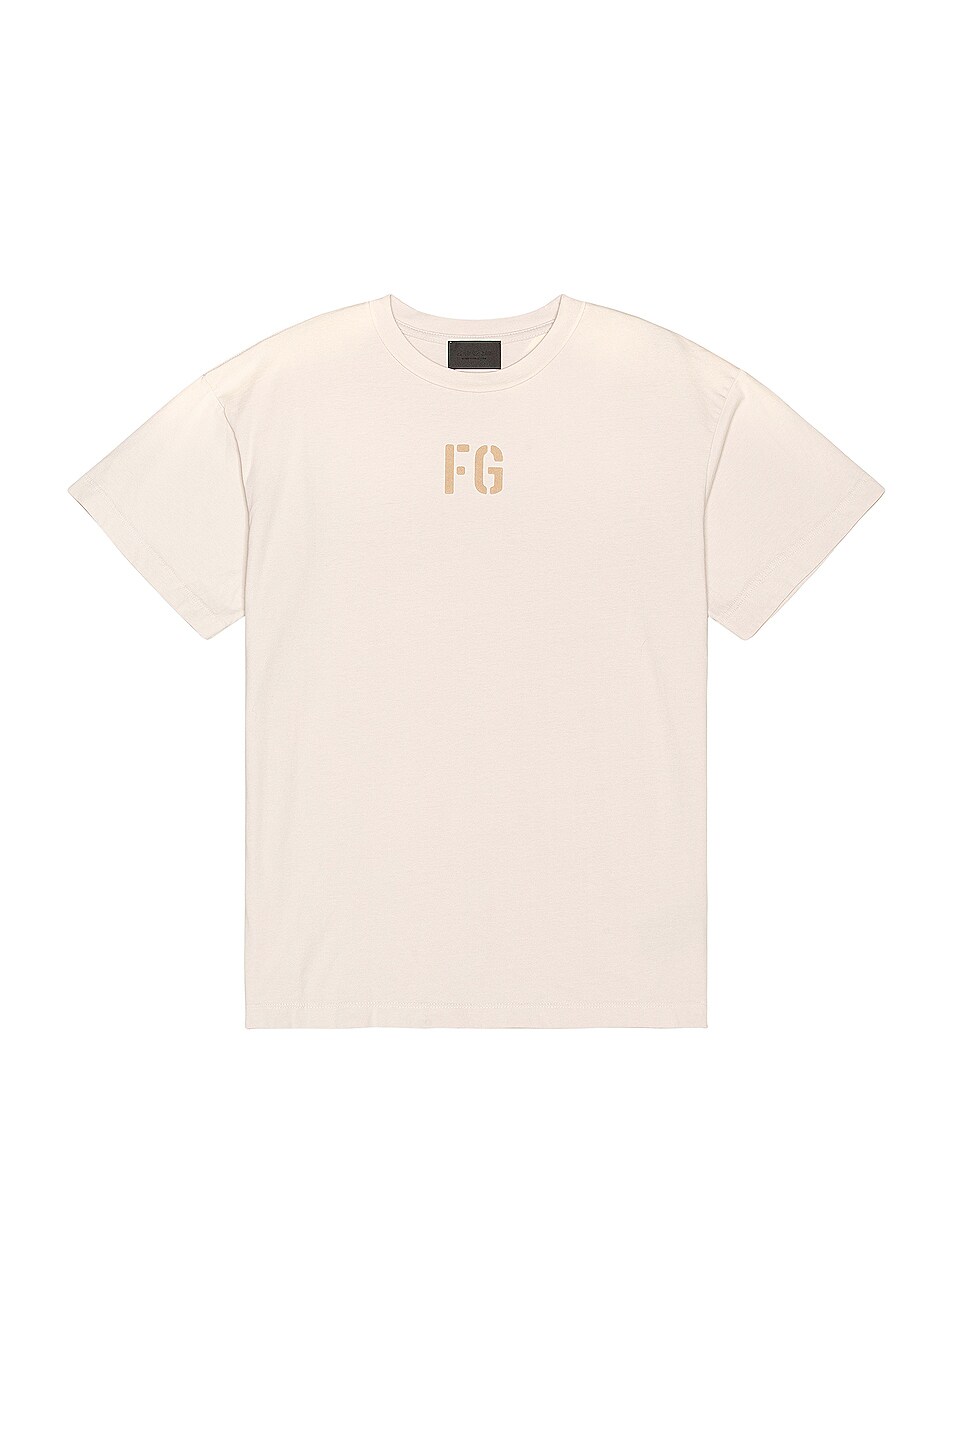 Image 1 of Fear of God FG Tee in Vintage Concrete White